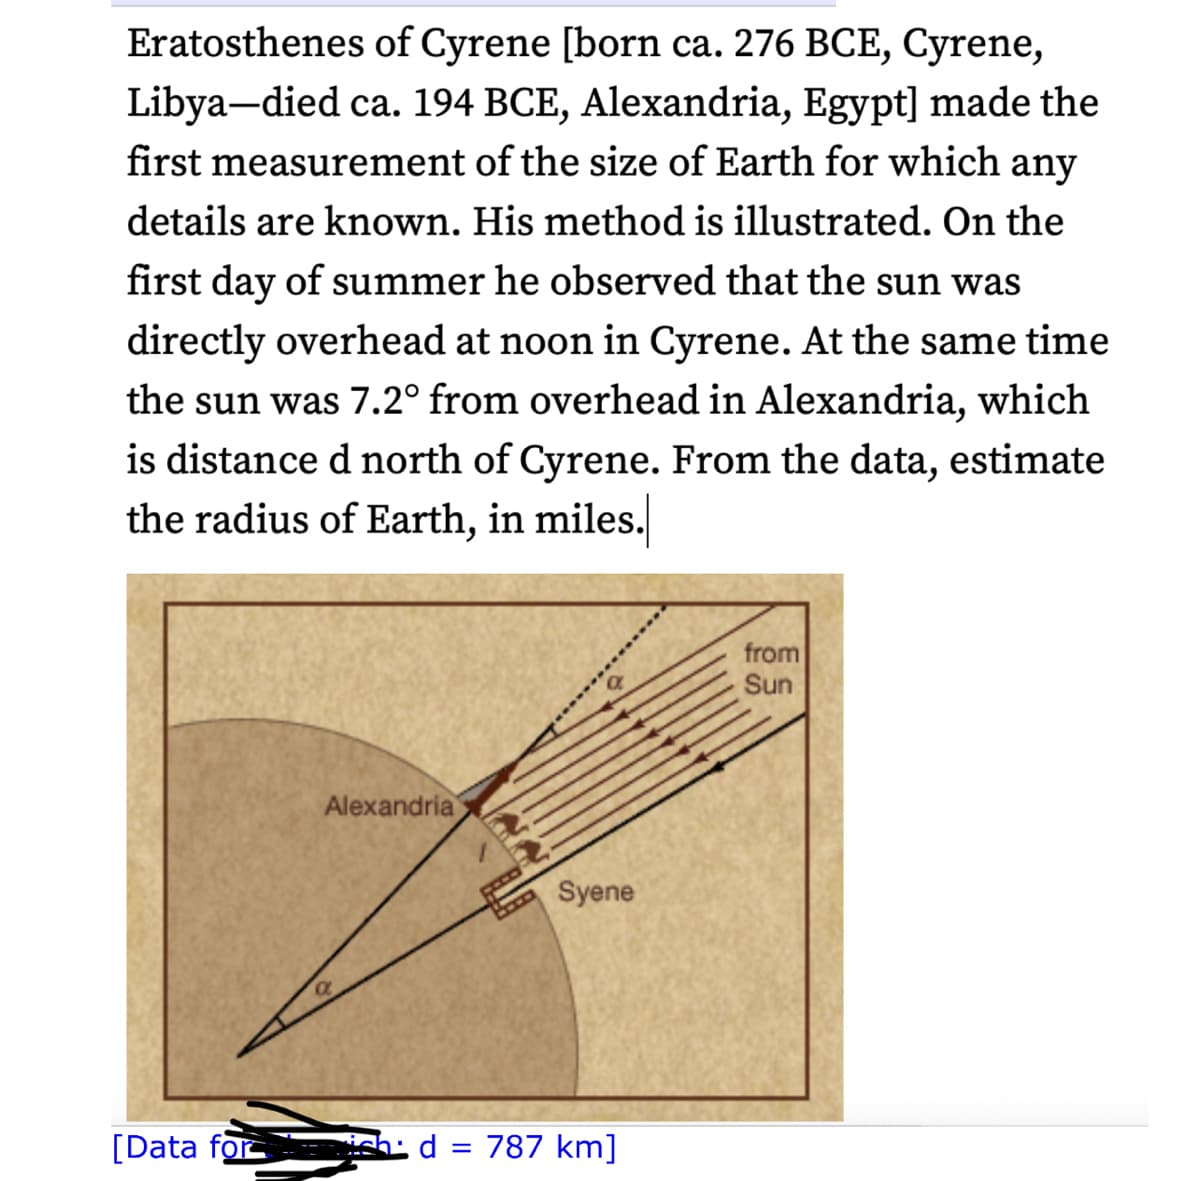 Eratosthenes of Cyrene [born ca. 276 BCE, Cyrene,
Libya-died ca. 194 BCE, Alexandria, Egypt] made the
first measurement of the size of Earth for which any
details are known. His method is illustrated. On the
first day of summer he observed that the sun was
directly overhead at noon in Cyrene. At the same time
the sun was 7.2° from overhead in Alexandria, which
is distance d north of Cyrene. From the data, estimate
the radius of Earth, in miles.
[Data for
Alexandria
Syene
d = 787 km]
from
Sun